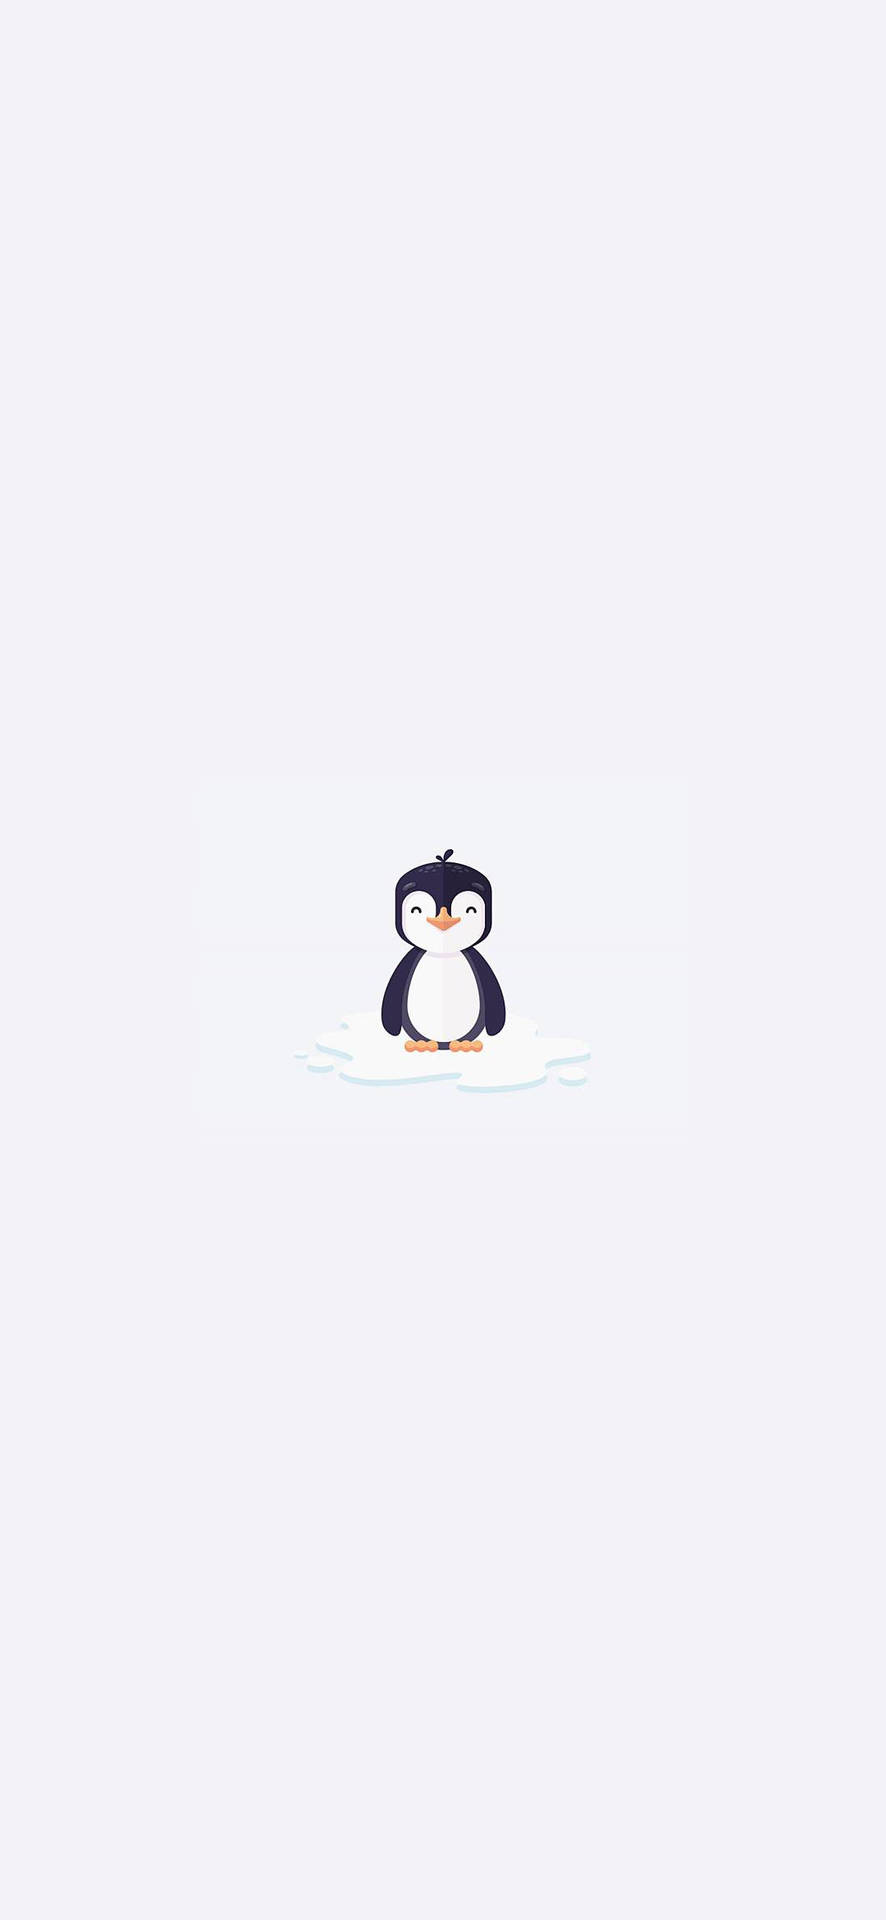 White Adorable Penguin Iphone Background